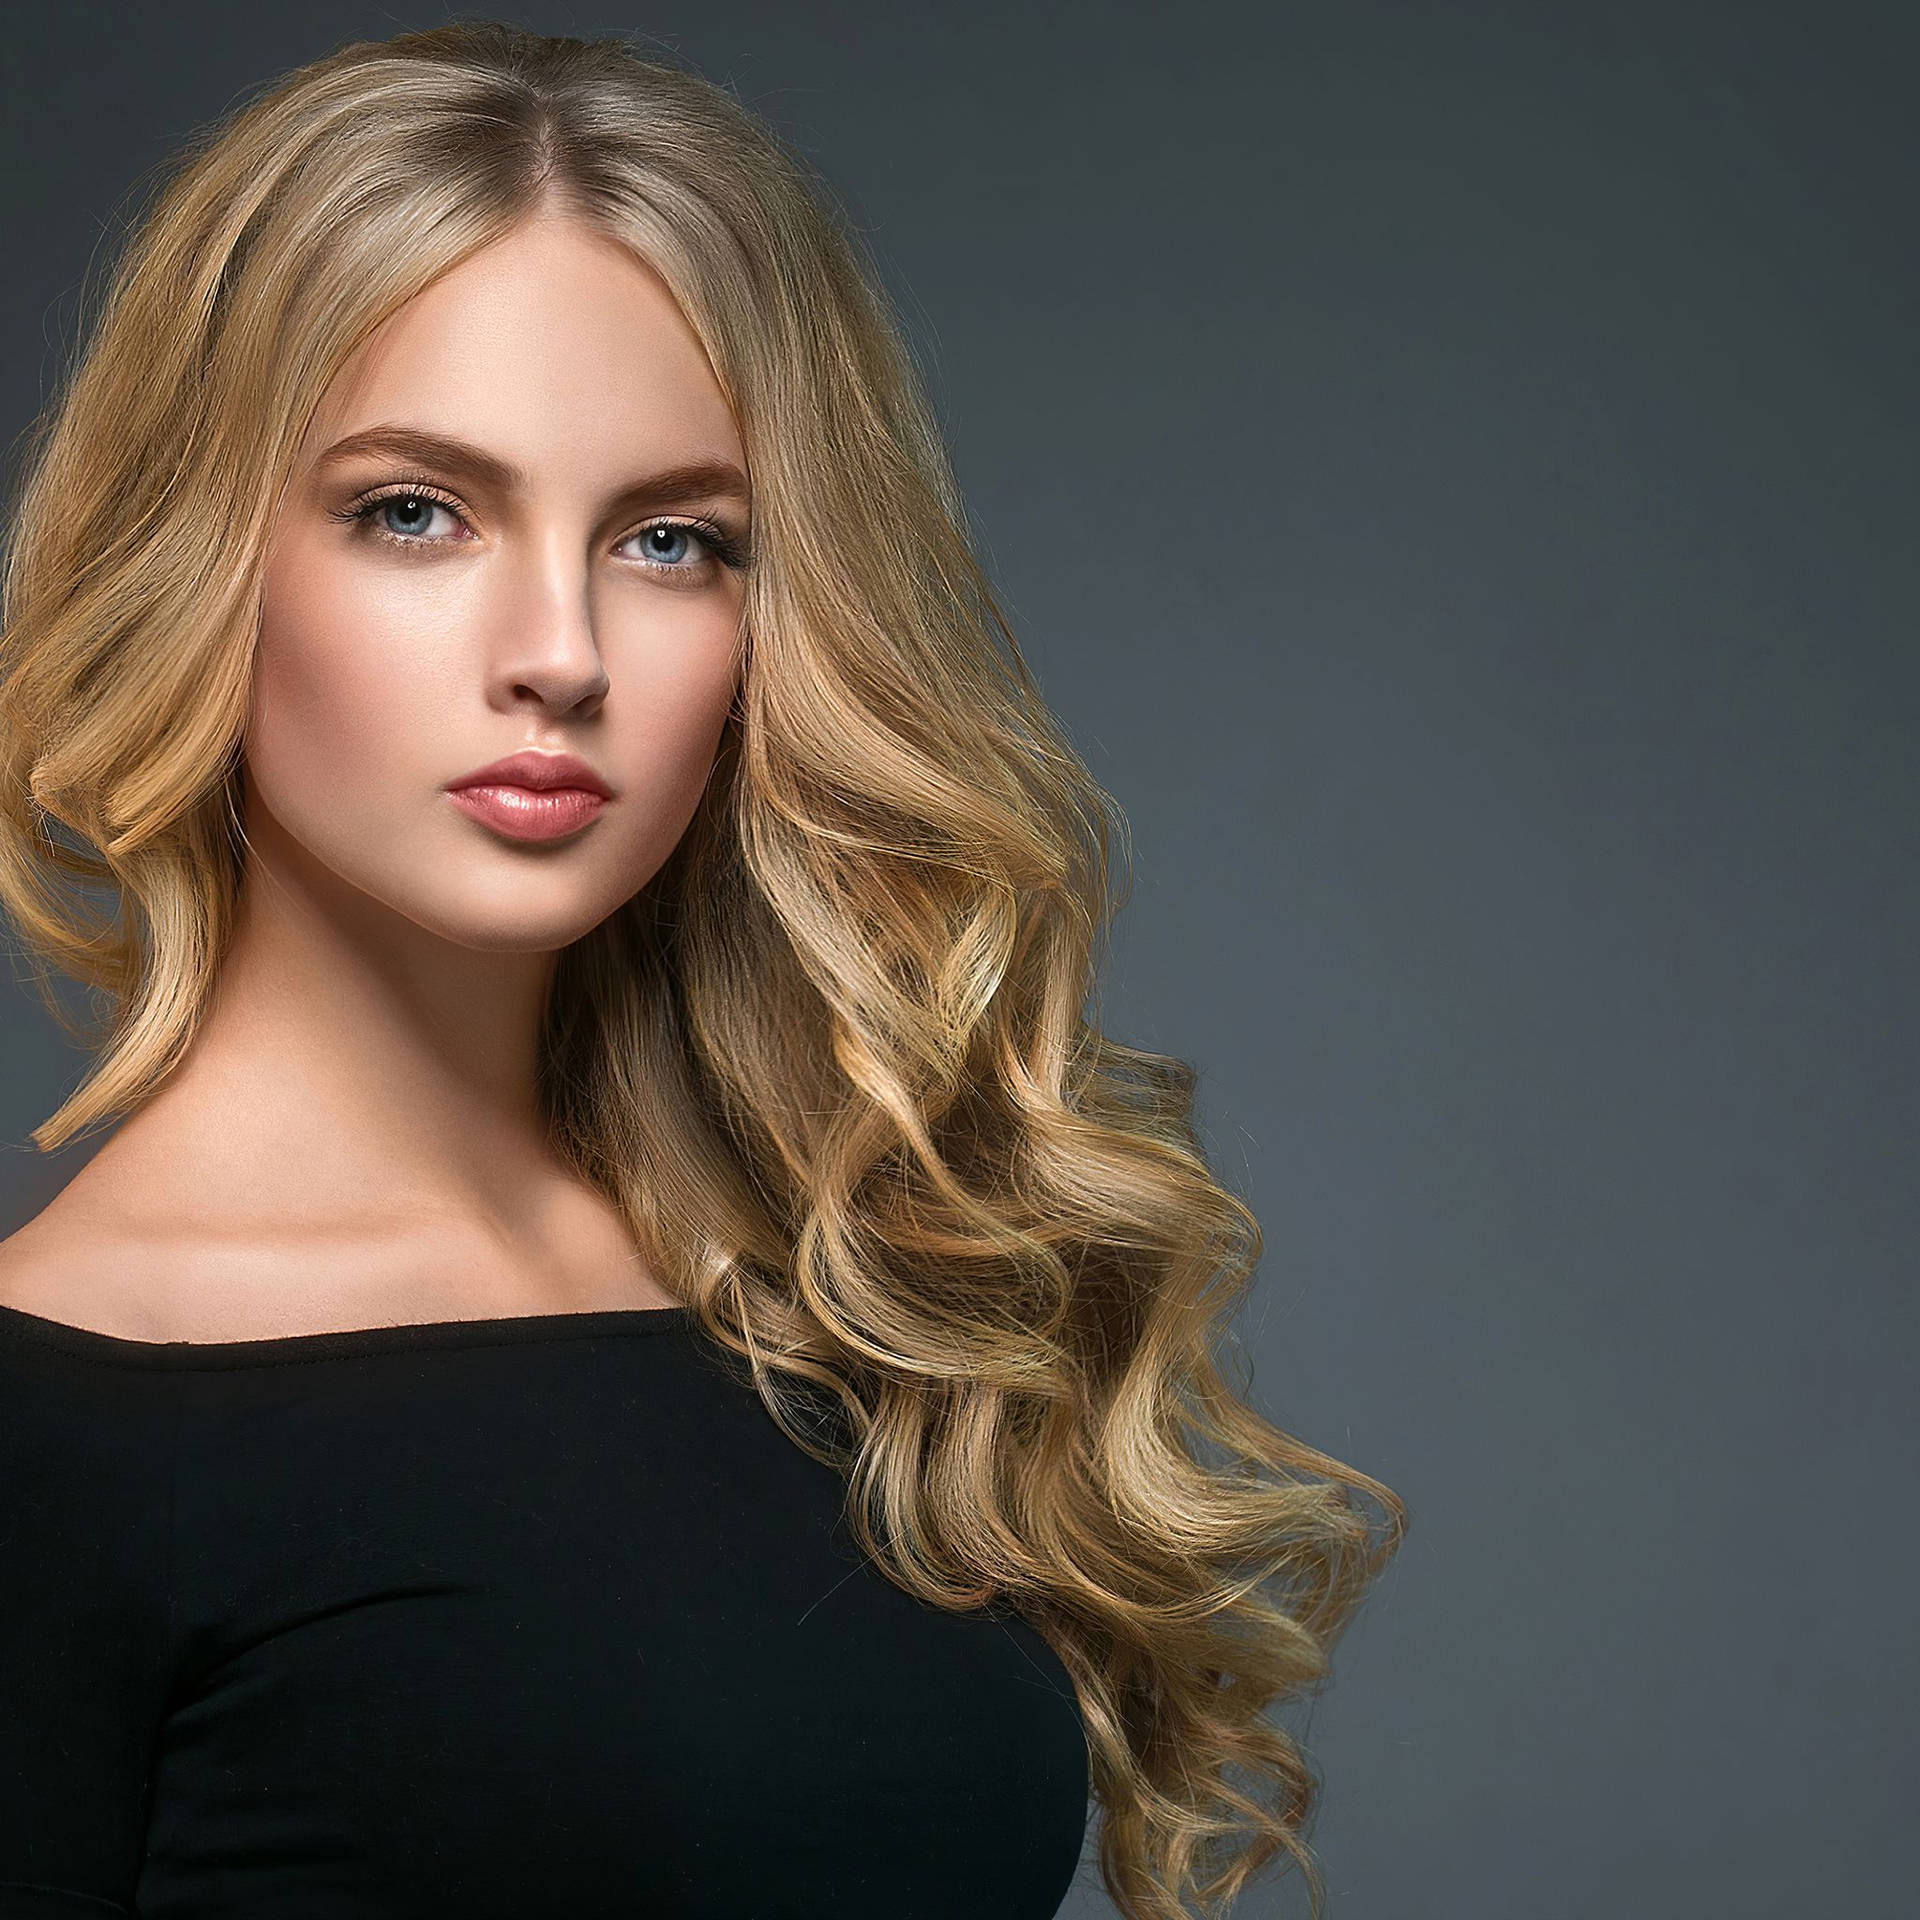 Blonde Woman For Salon Advertising Picture